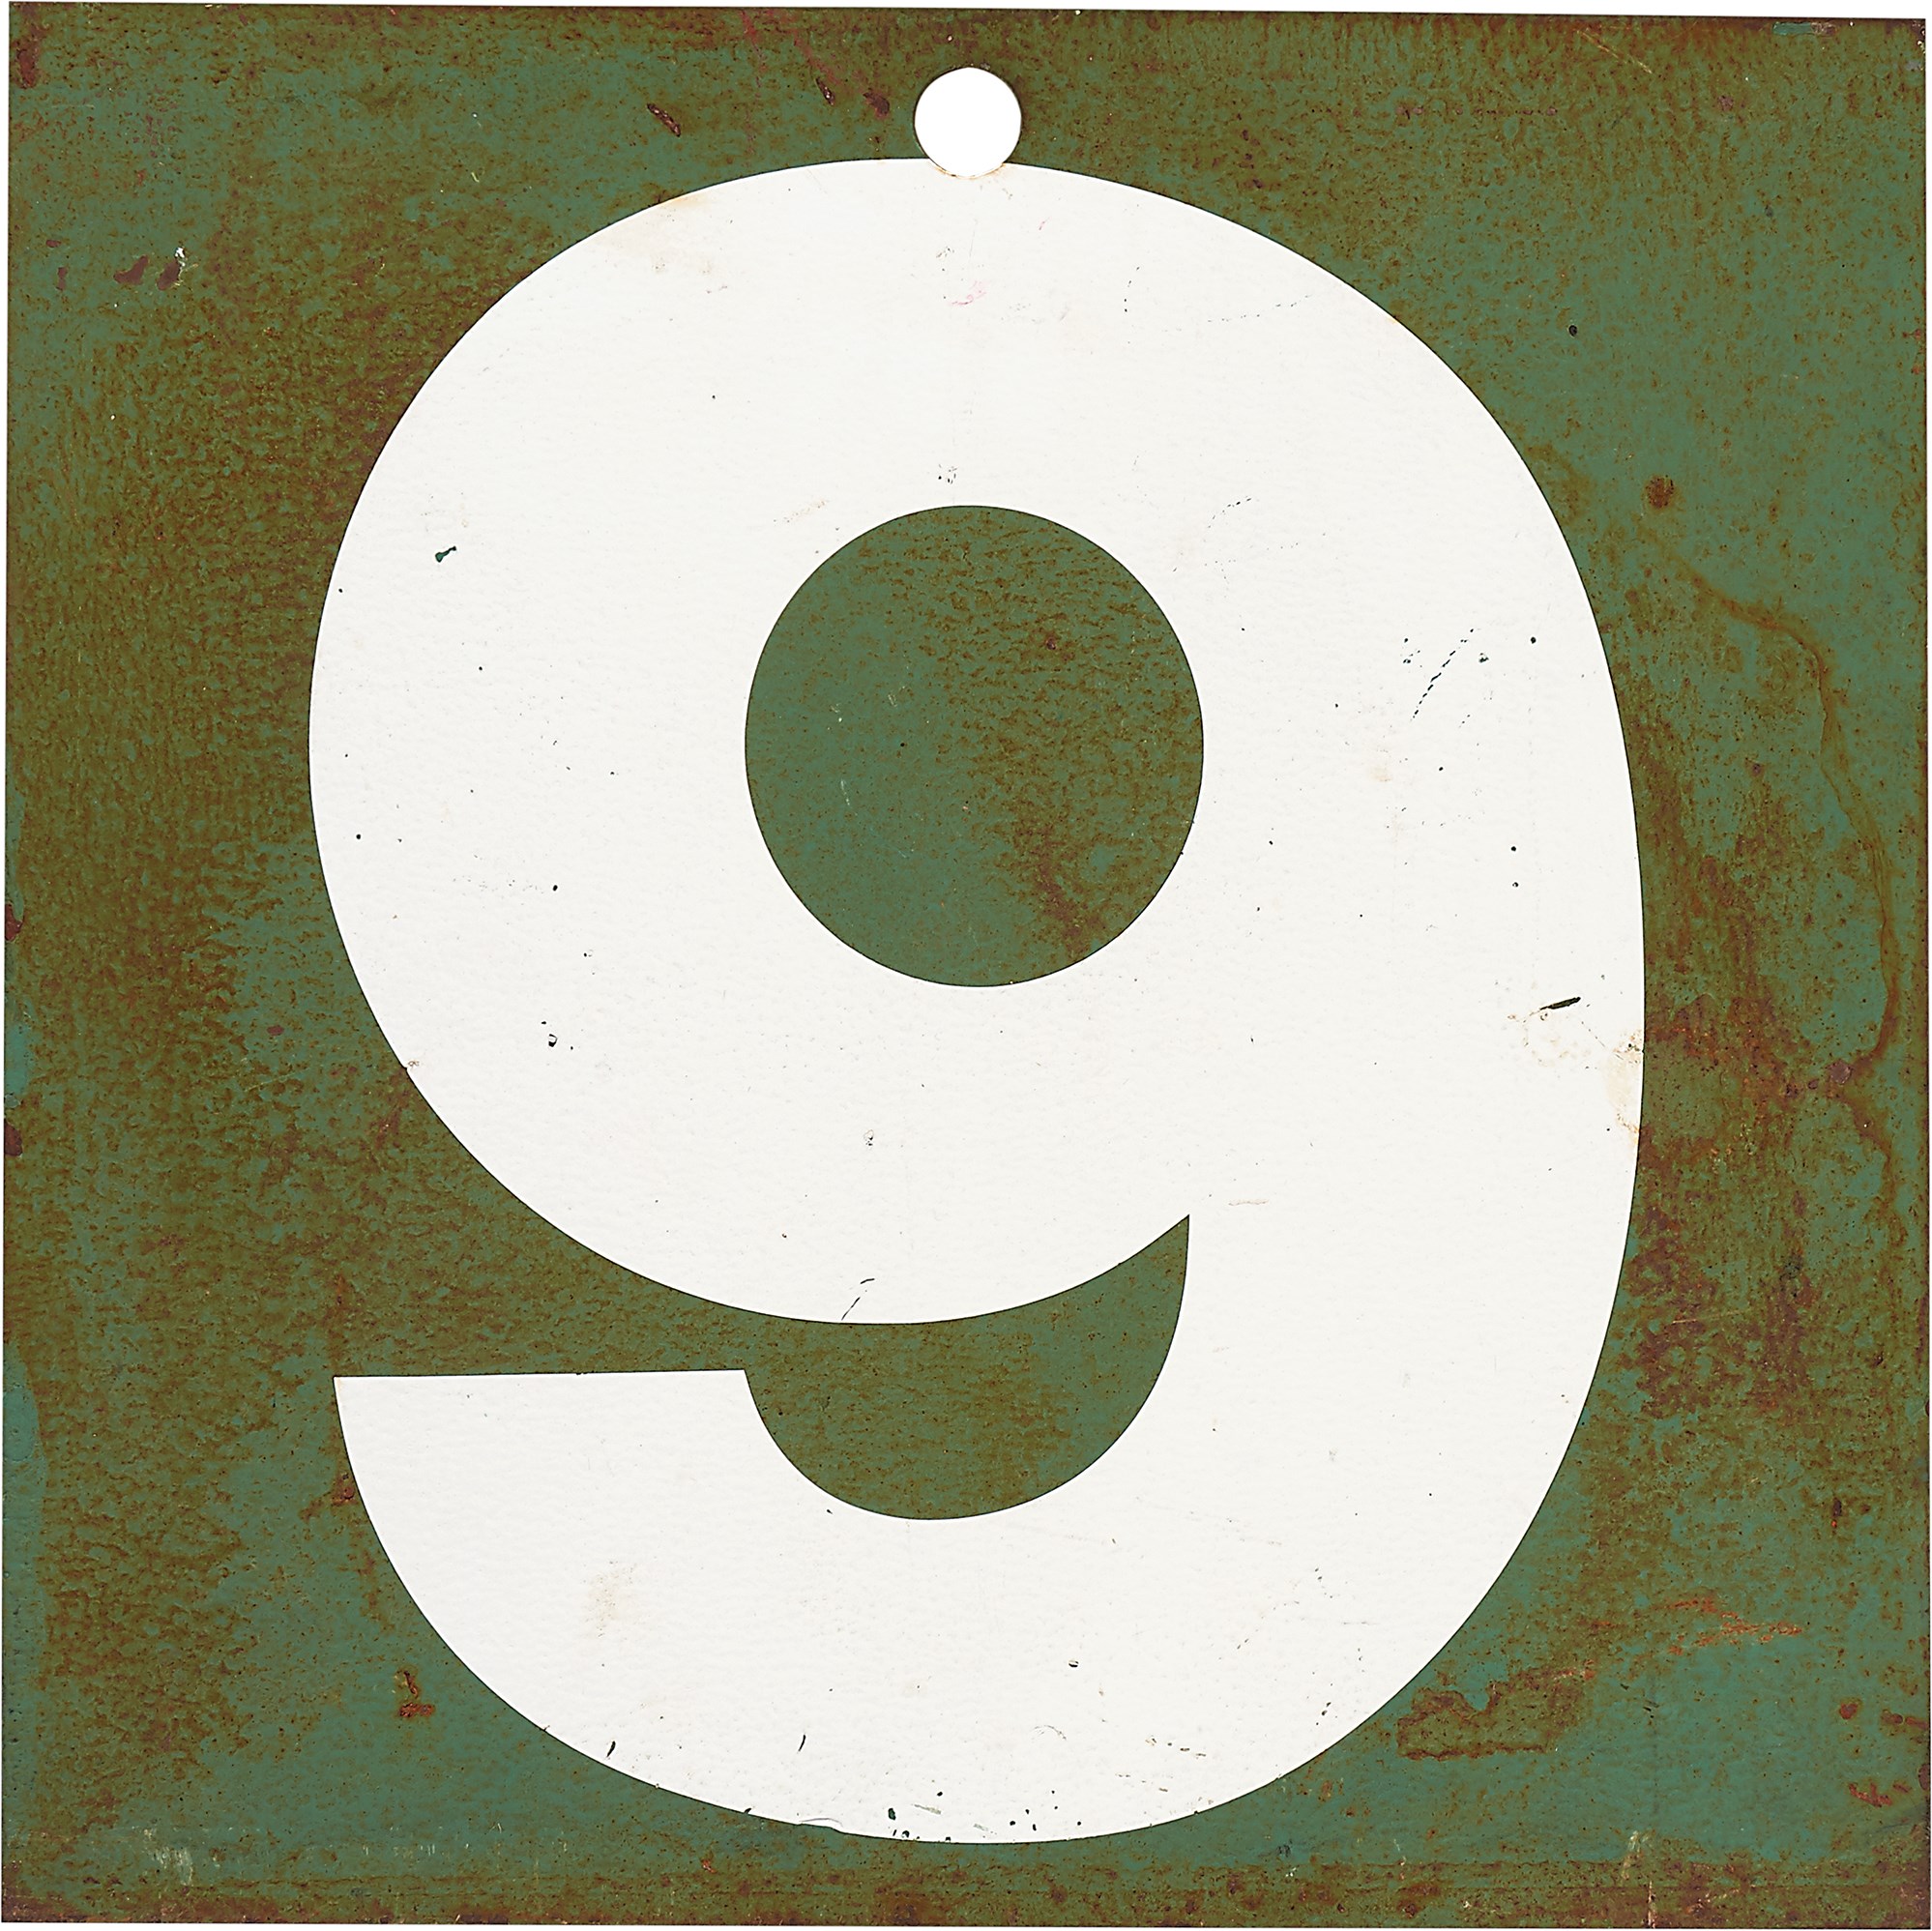 - Fenway Park "9" Scoreboard Sign - Ted Williams Number